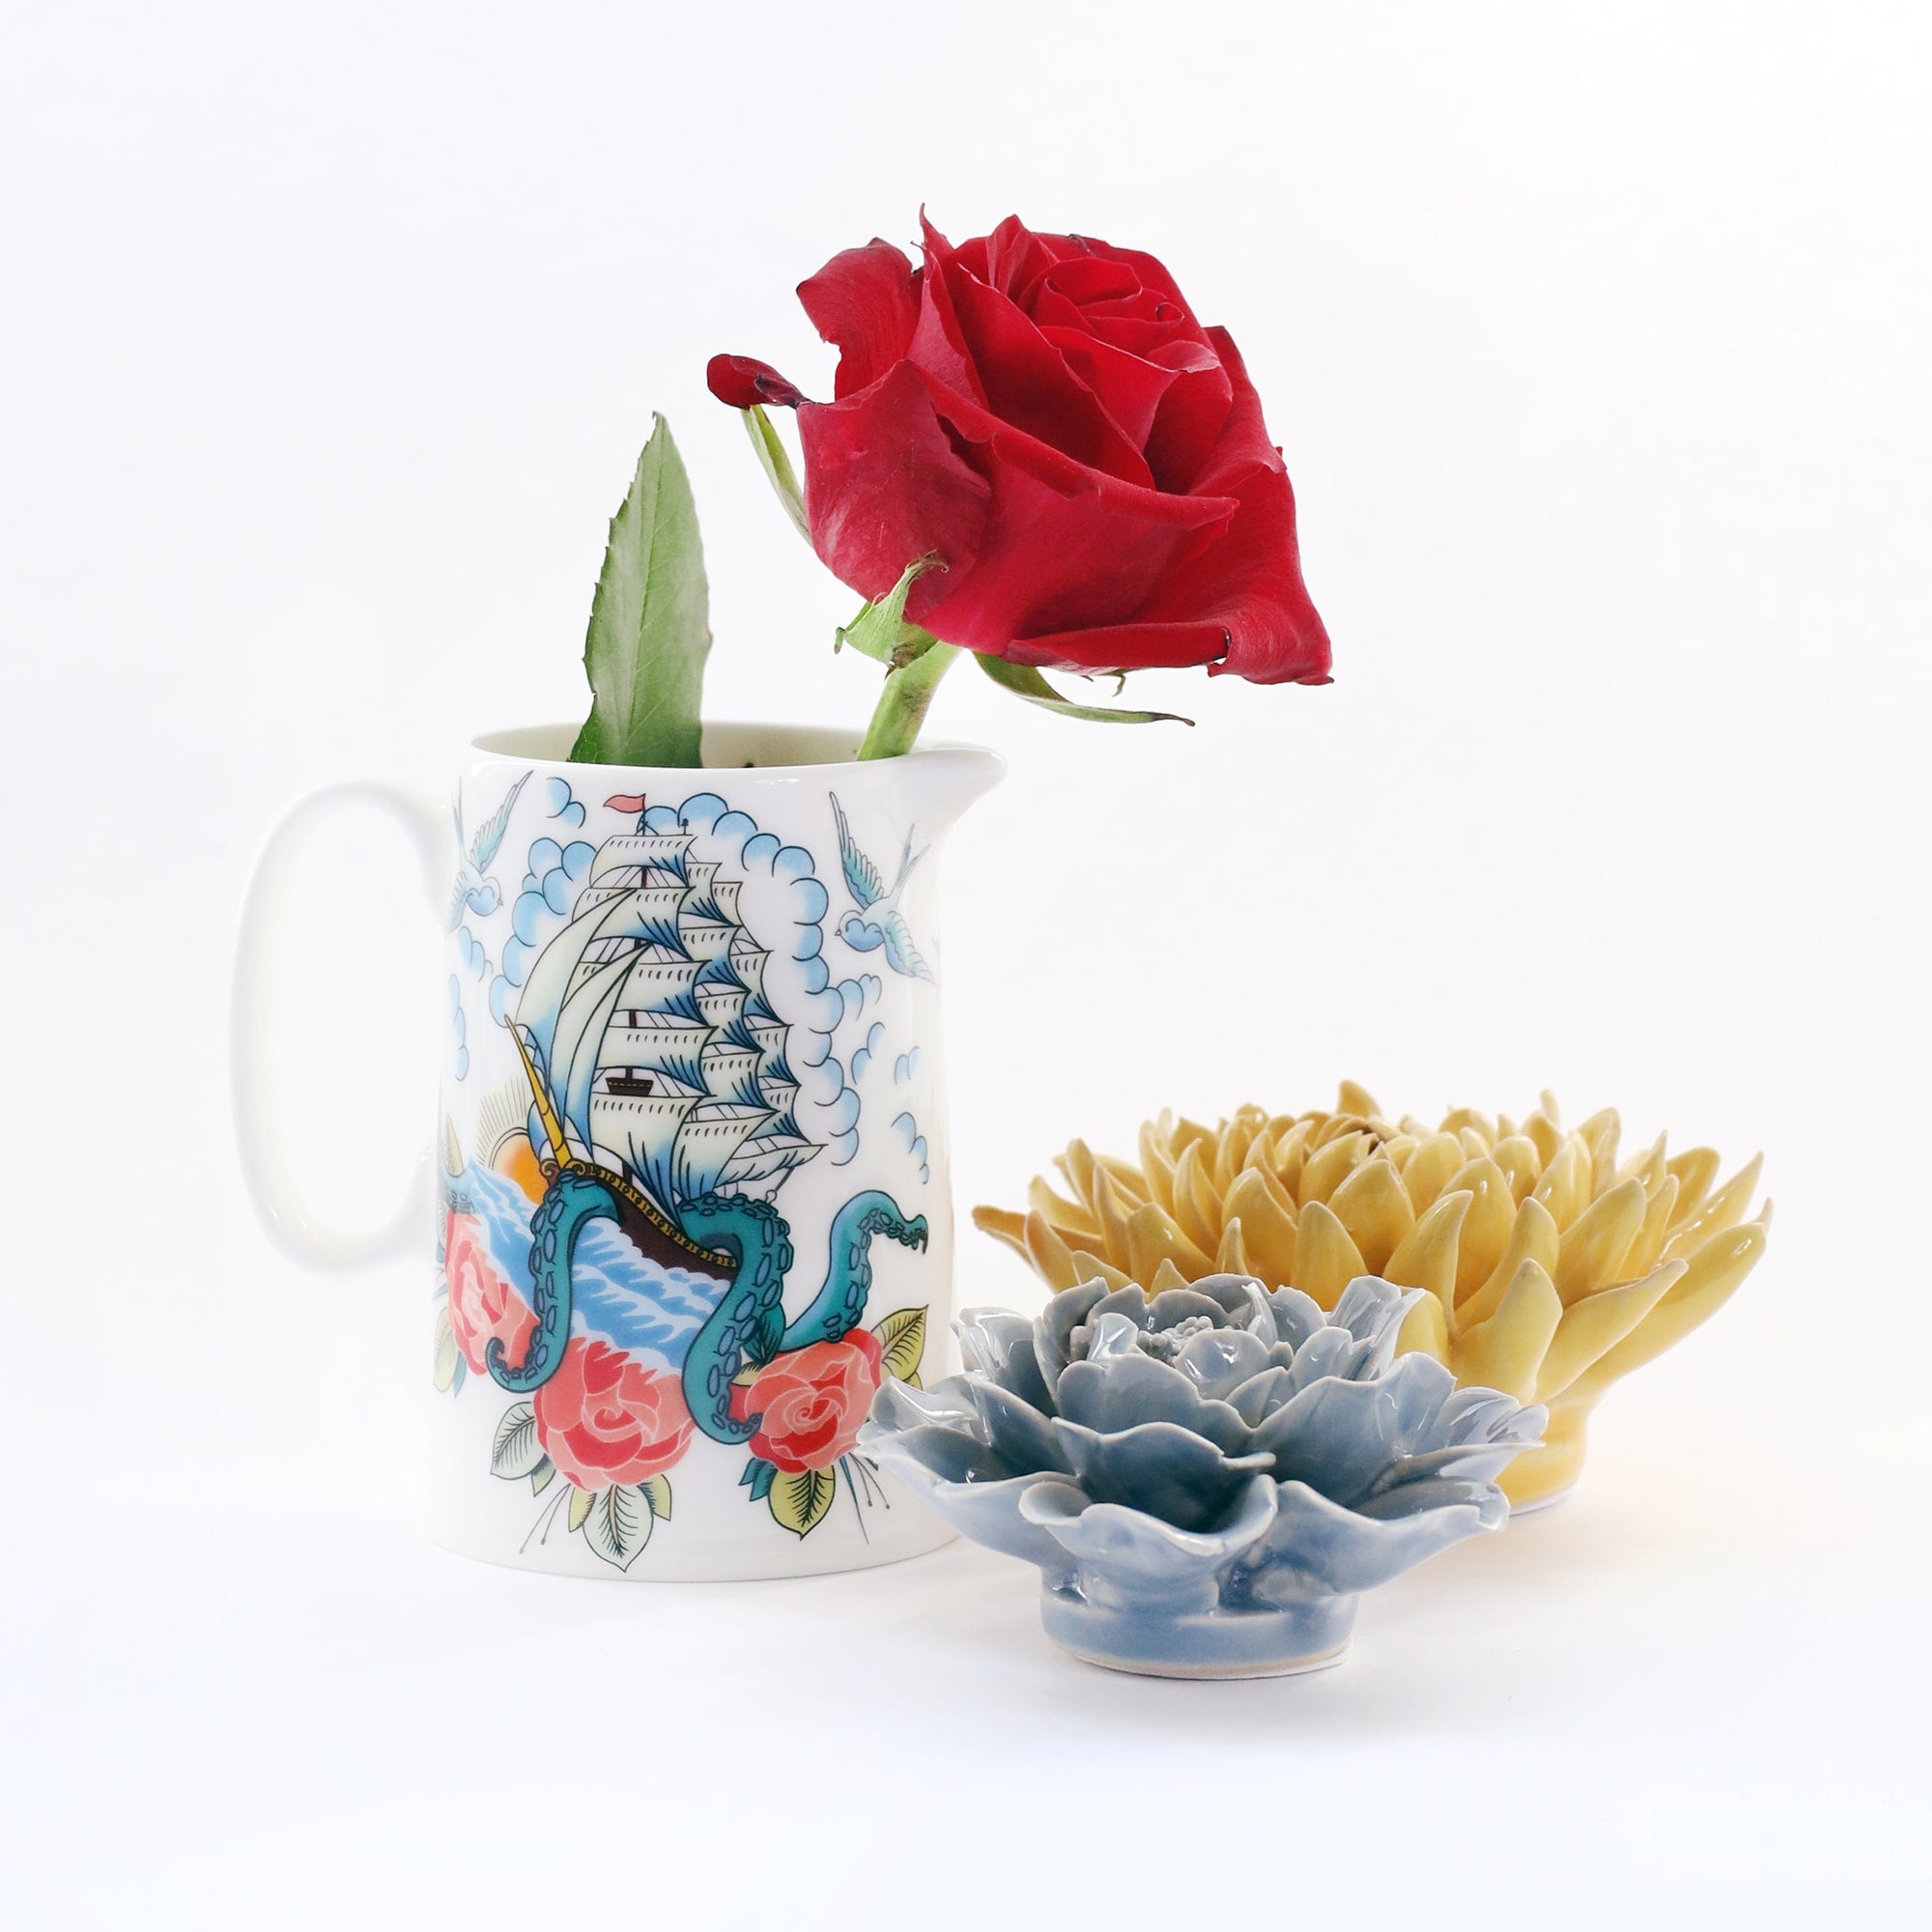 White jug with ship,kraken and roses design inspired by sailor's tattoos on a white background with 2 ceramic flowers nest to it and a red rose in the jug.